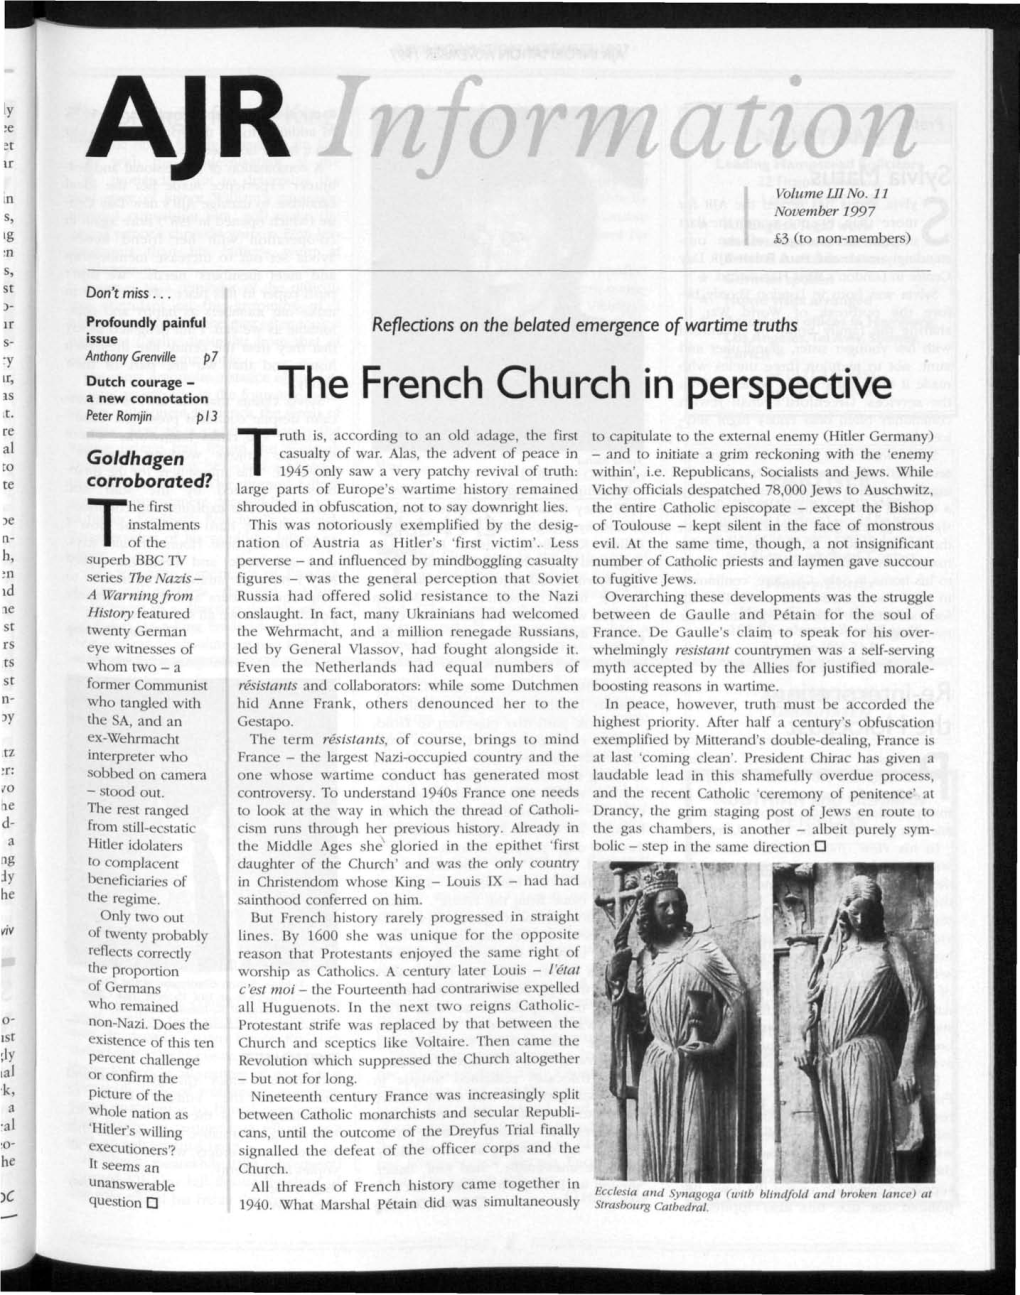 The French Church in Perspective